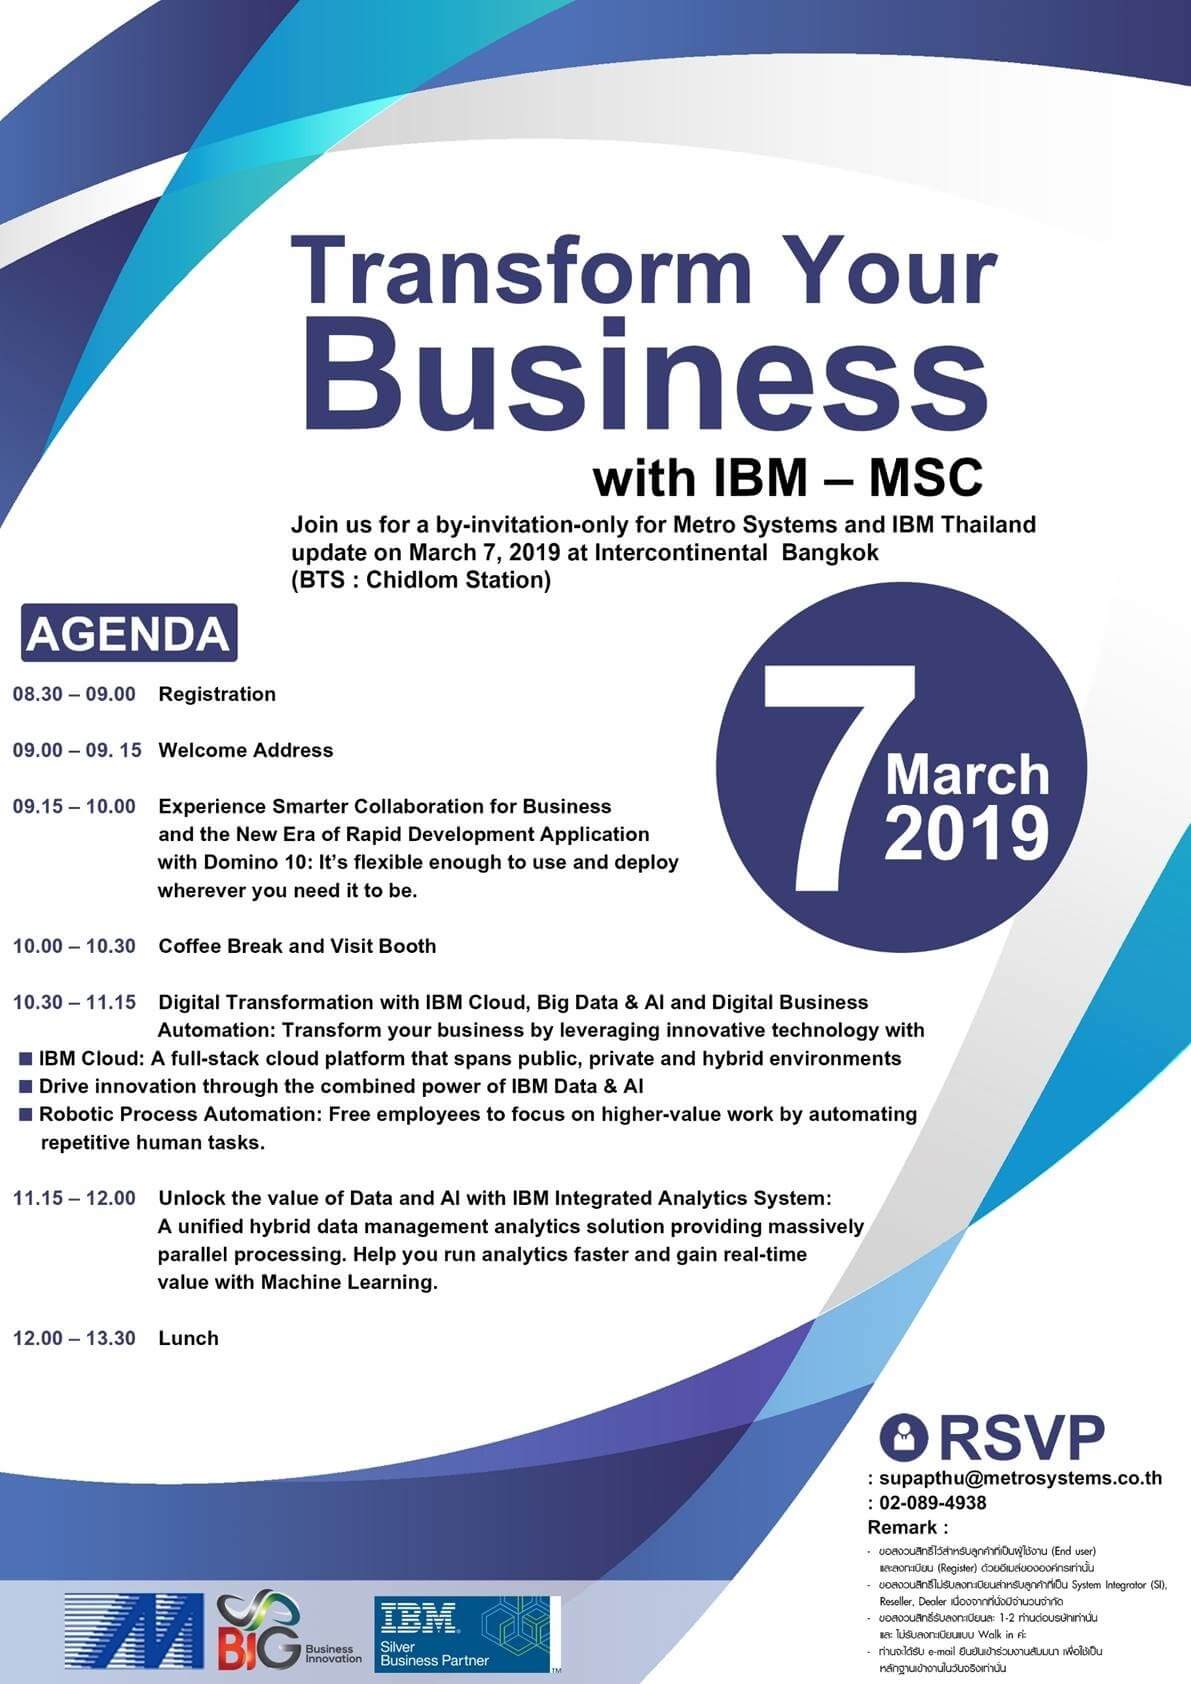 Transform Your Business With IBM-MSC on Mar7,2019